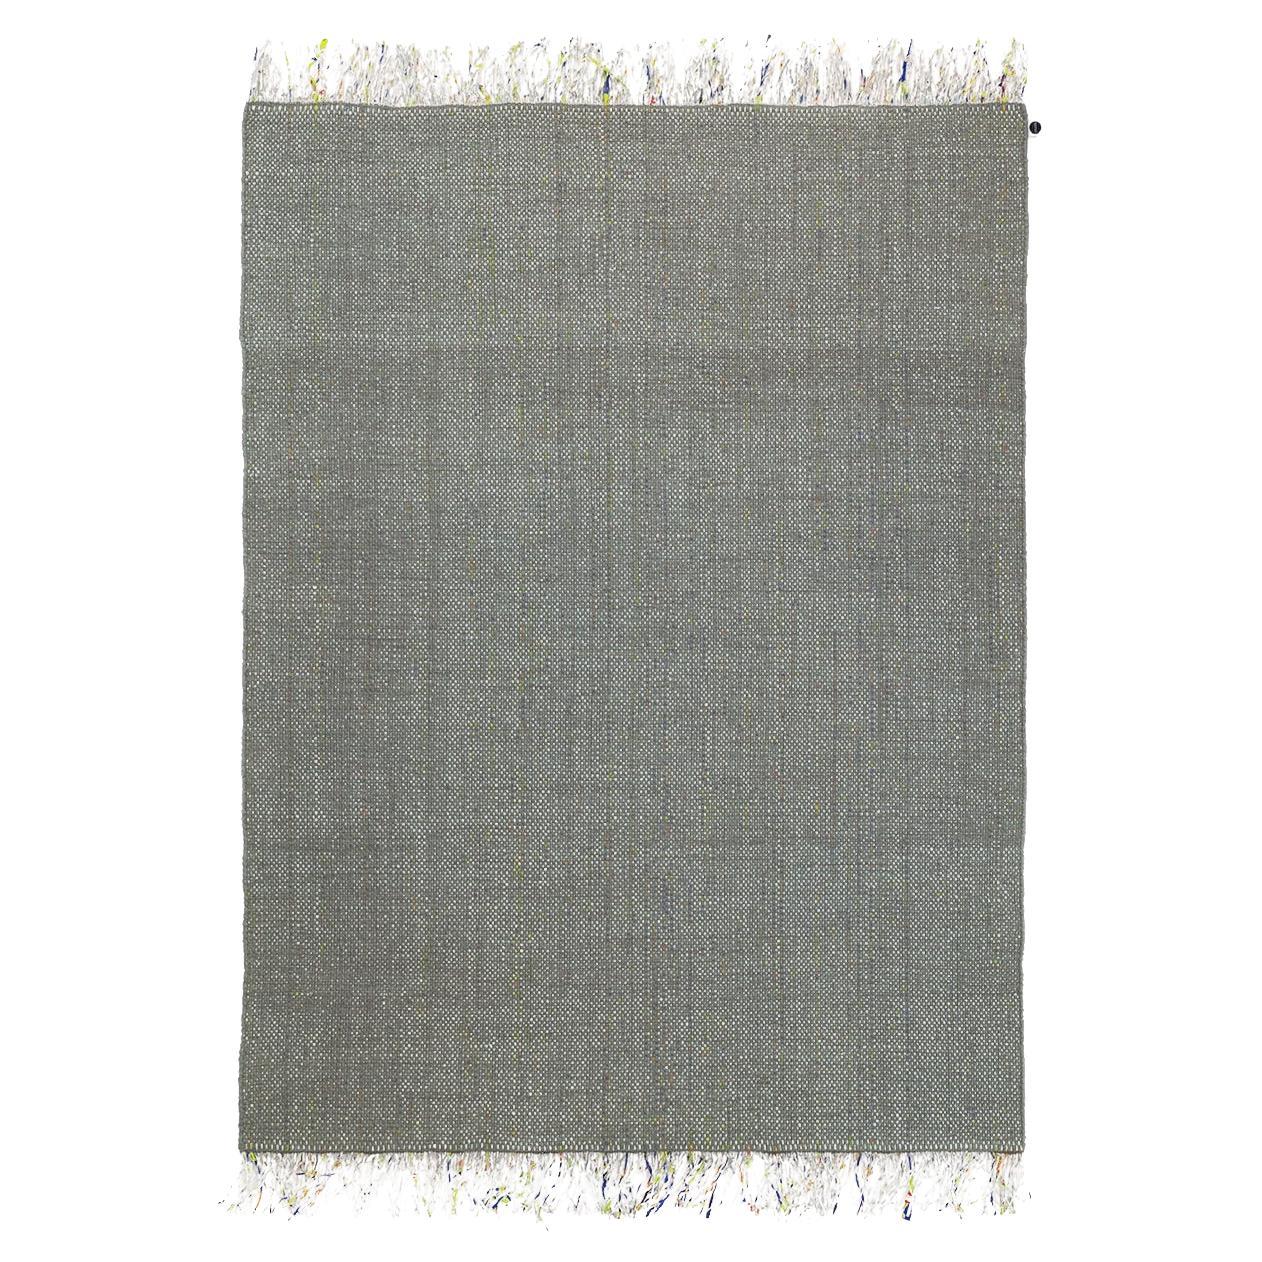 Candy Wrapper Rug_Dining_vetiver / Award Winning Woven Rug by Jutta Werner